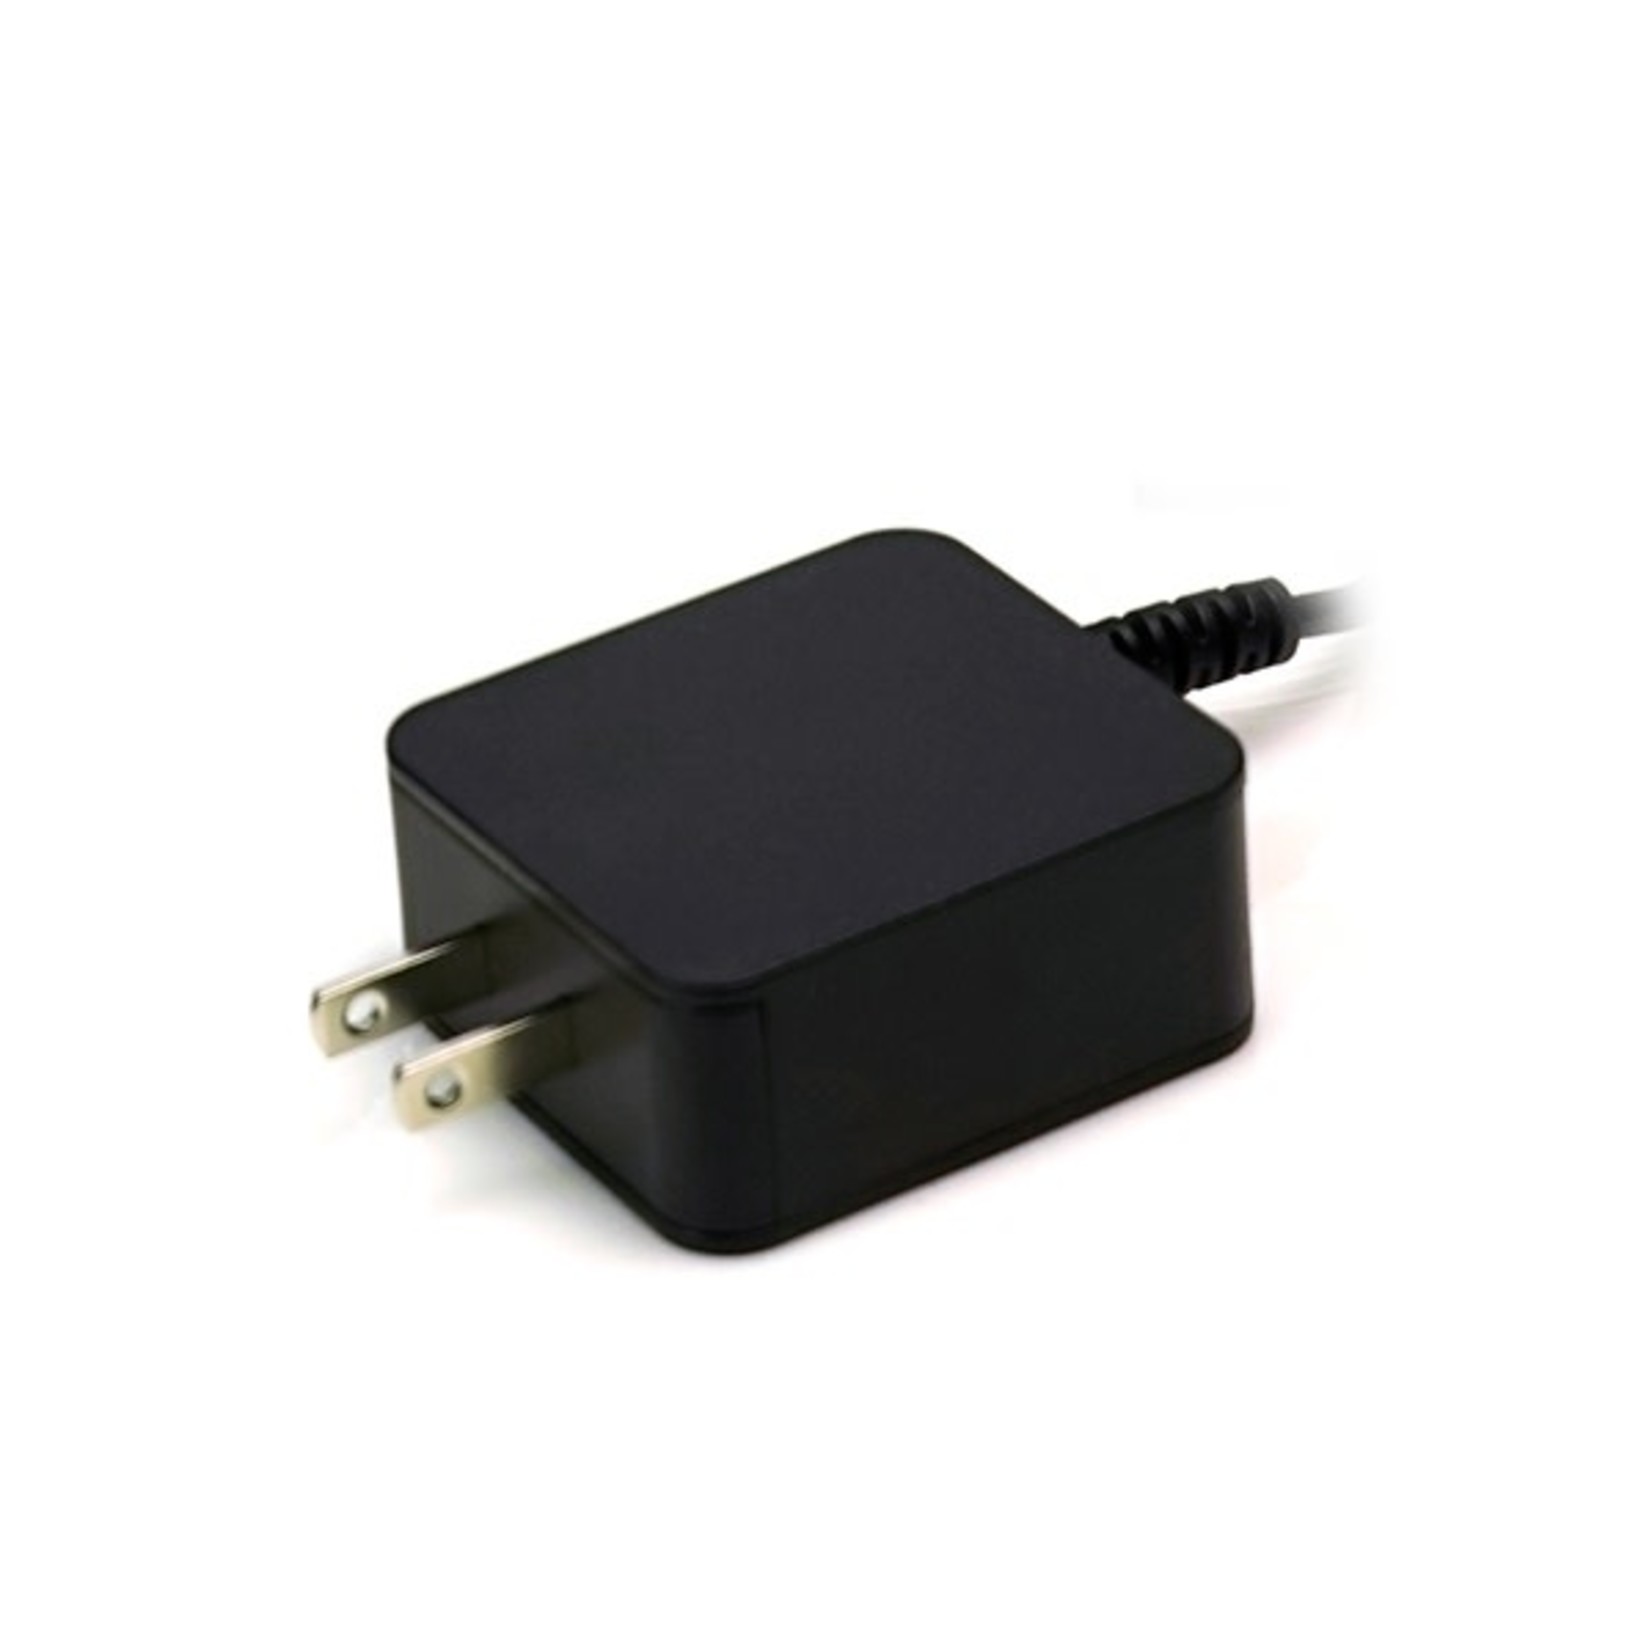 Muchmore MM-PALEDSP Muchmore Power Supply Adapter for LED